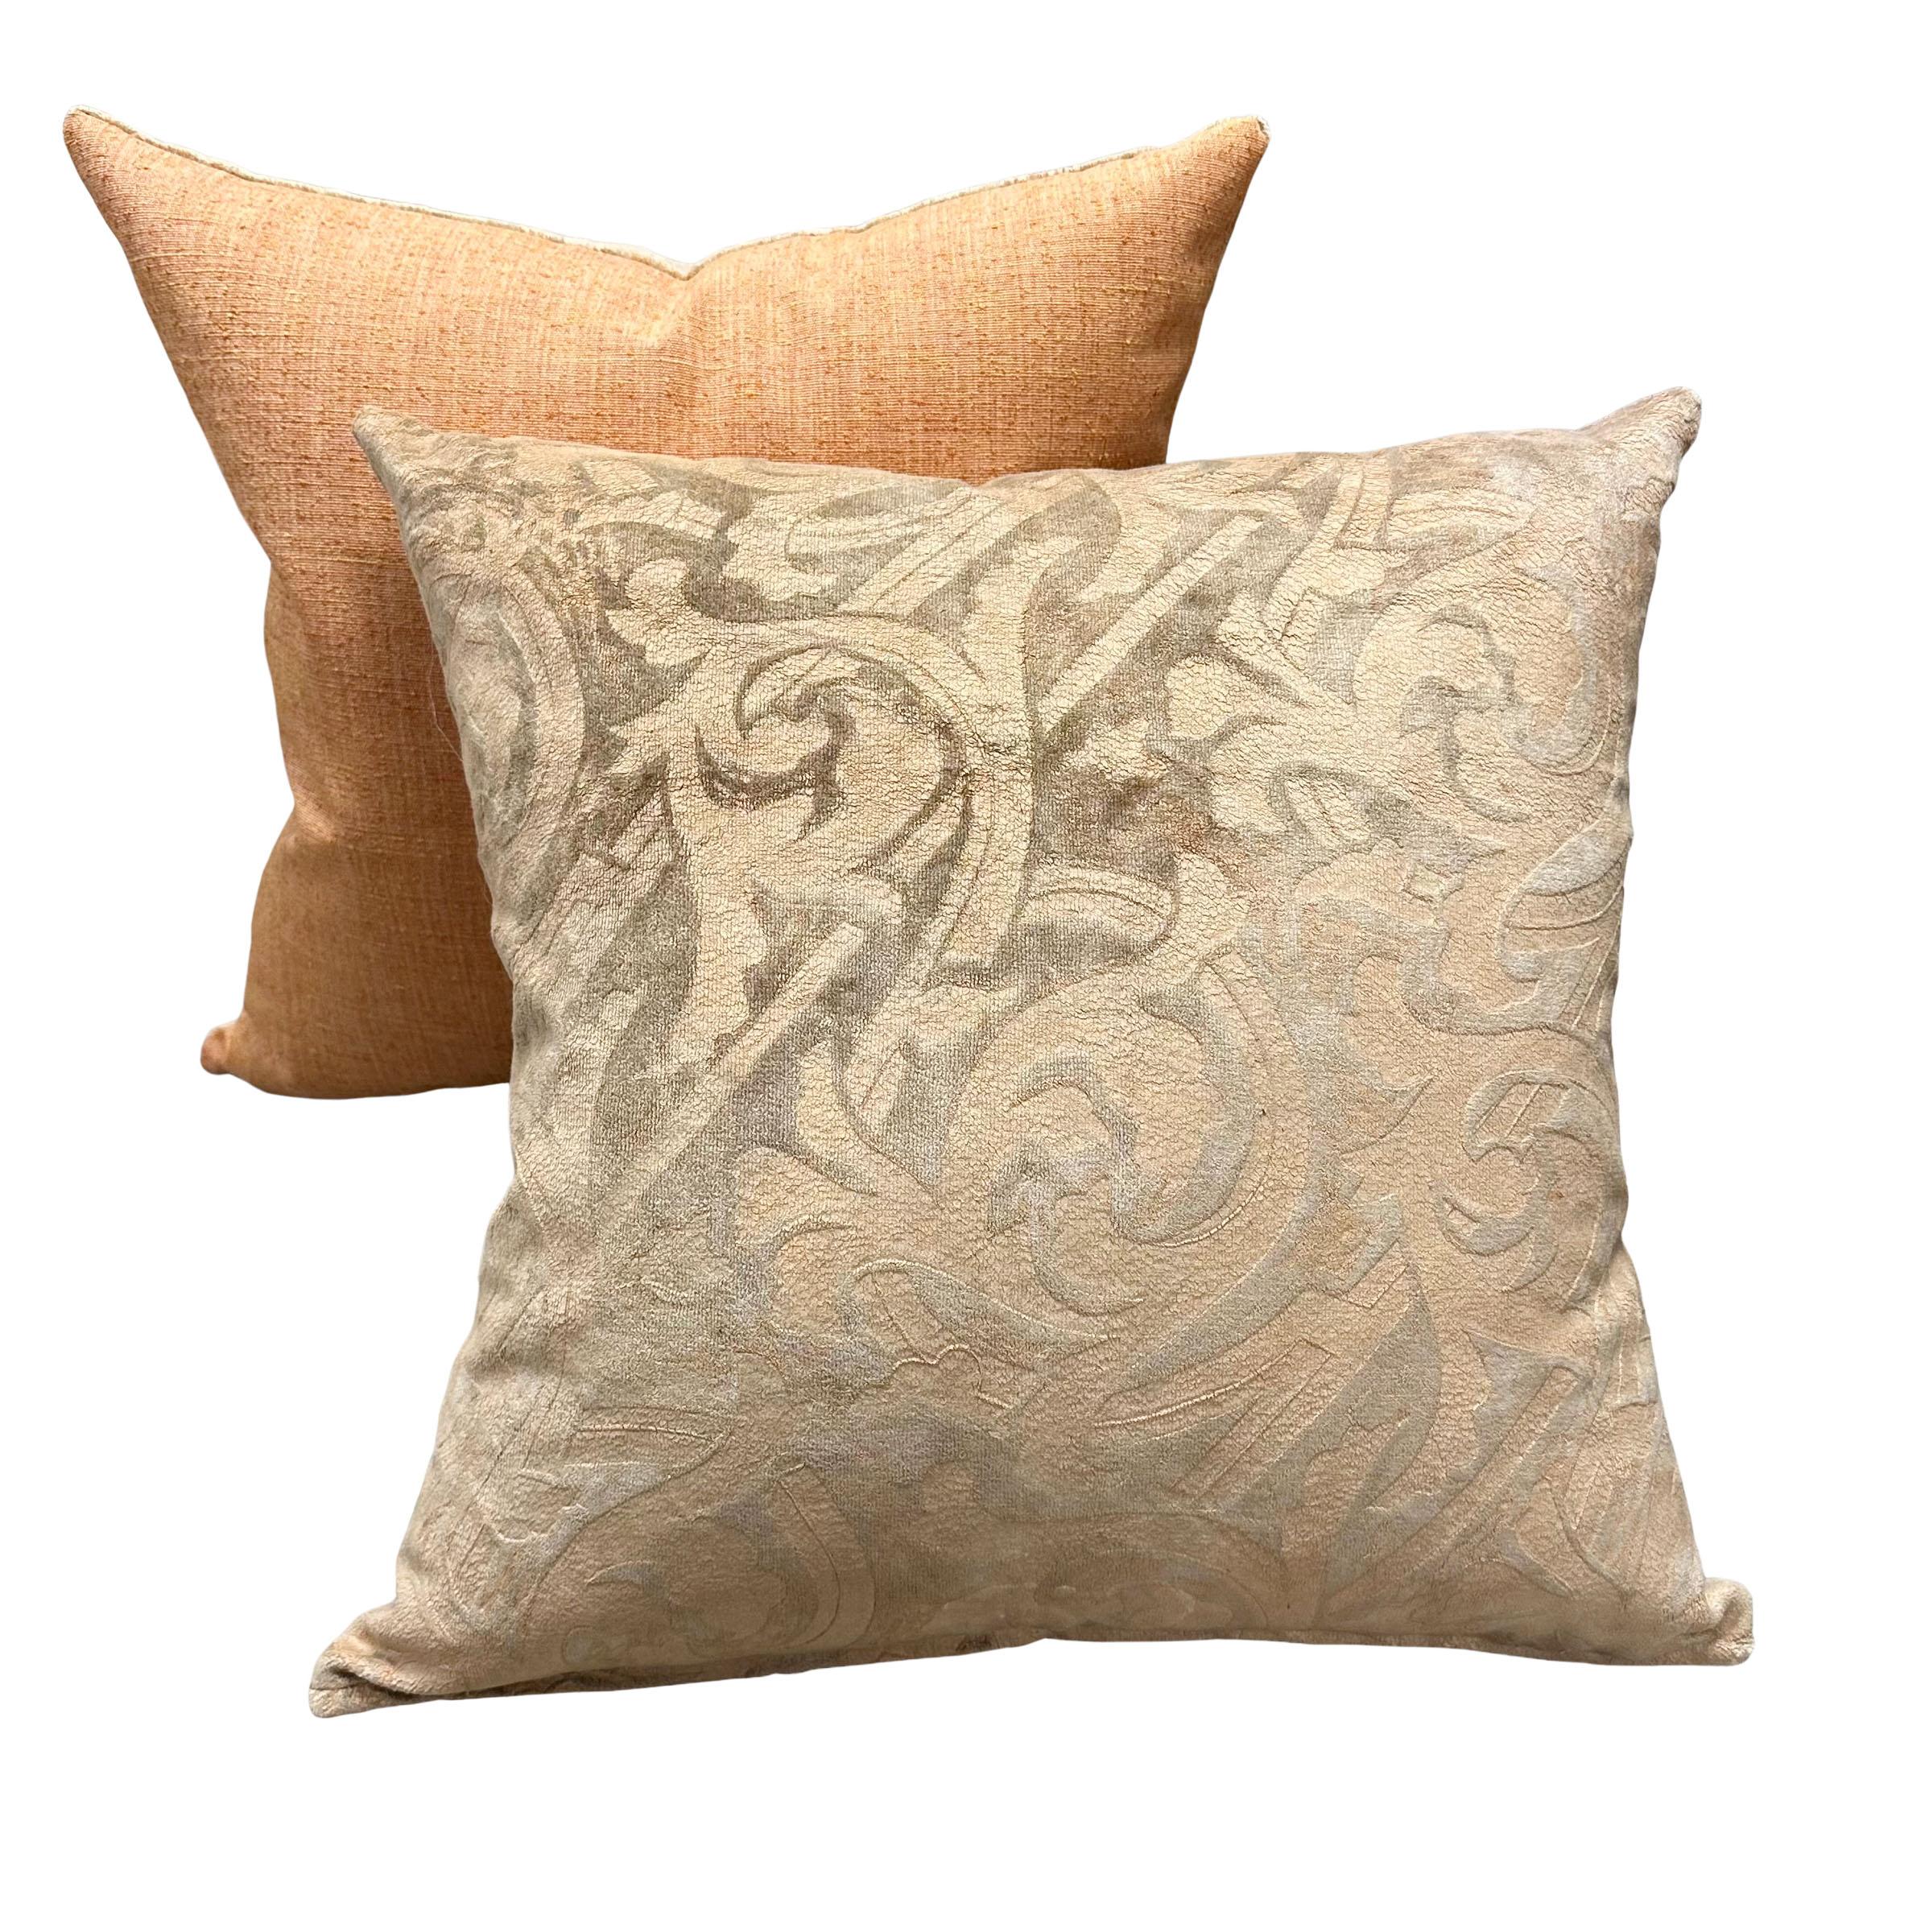 An elegant pair of printed silver and peach Fortuny silk and cotton velvet fabric pillows. The back is a vintage knobby linen silk and the interiors are down filled. These do not have any piping or trim so they have more of a modern look but are